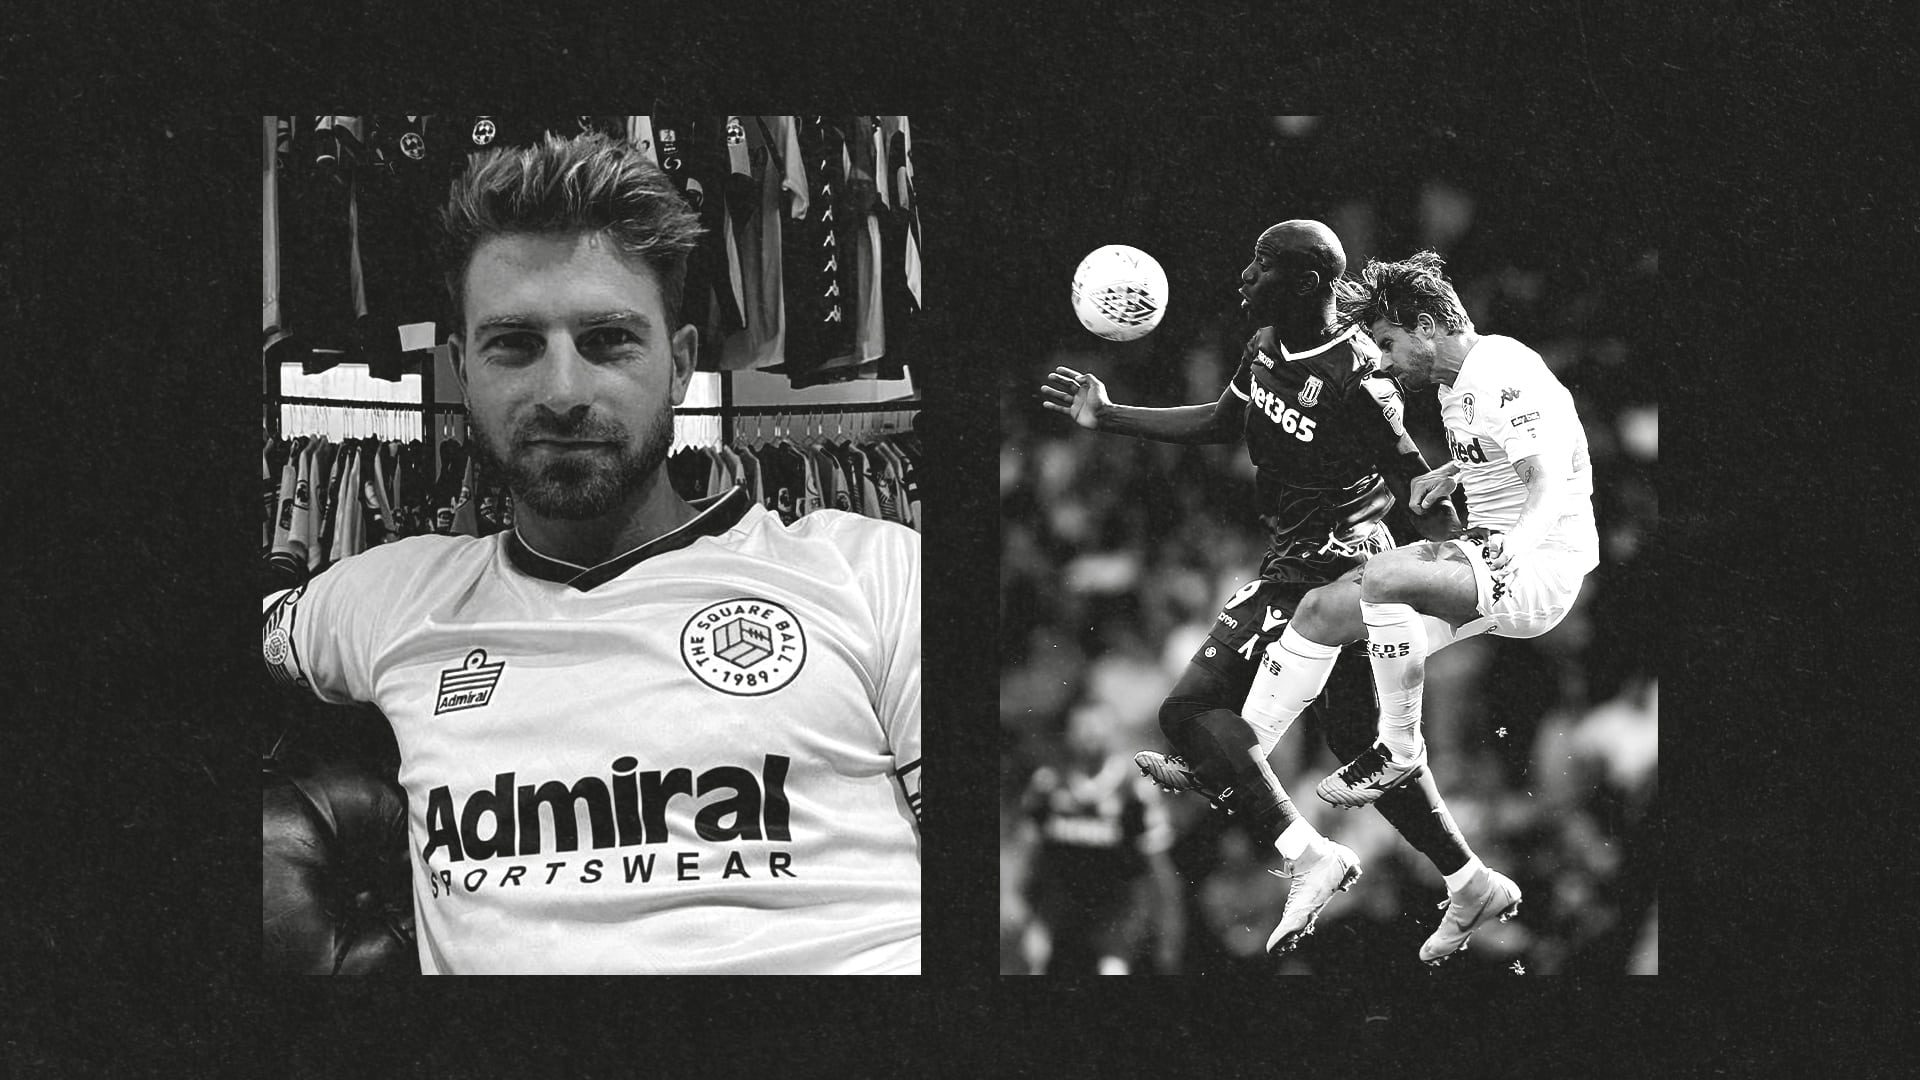 Two black and white photos of Gaetano Berardi, one of him sitting comfortably in a TSB x Admiral shirt, one of him winning a header because that's what he did